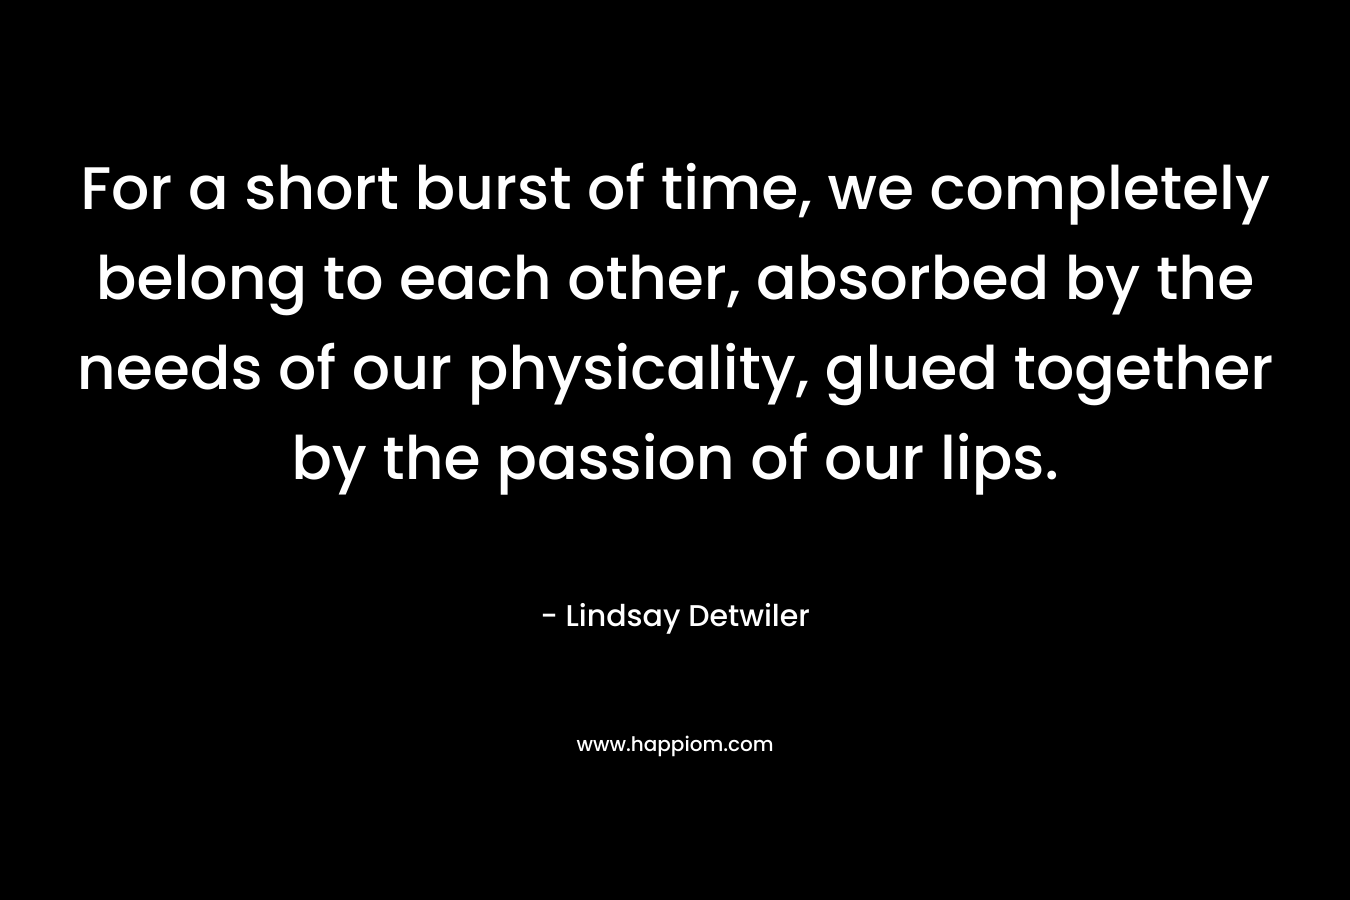 For a short burst of time, we completely belong to each other, absorbed by the needs of our physicality, glued together by the passion of our lips. – Lindsay Detwiler